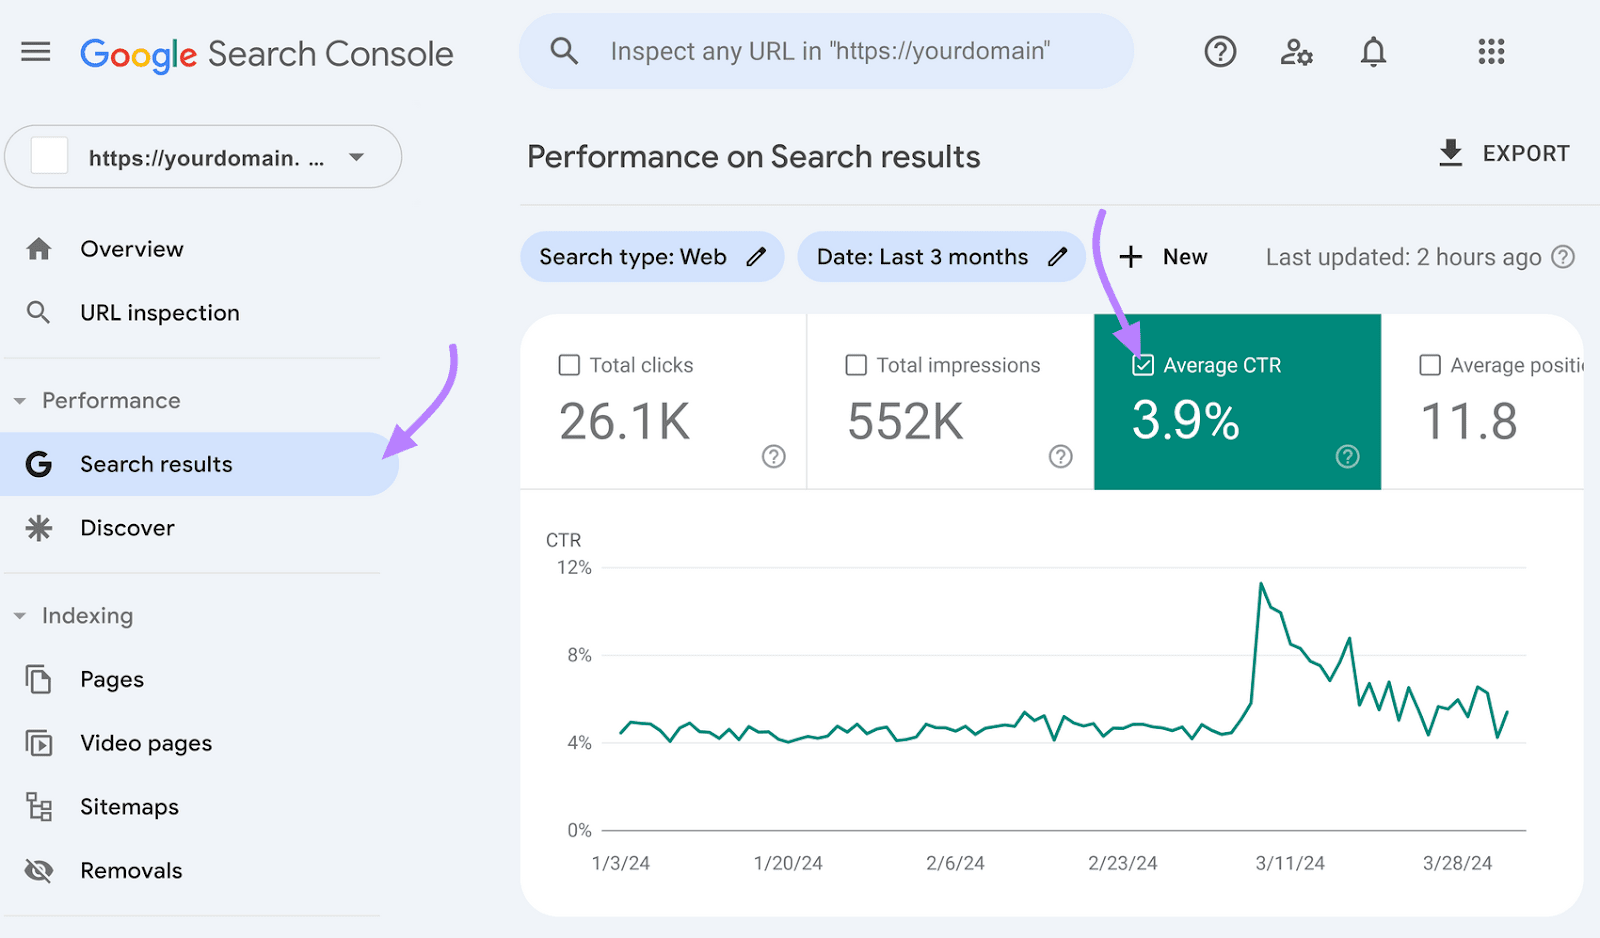 Average CTR metric showing 3.9% in Google Search Console